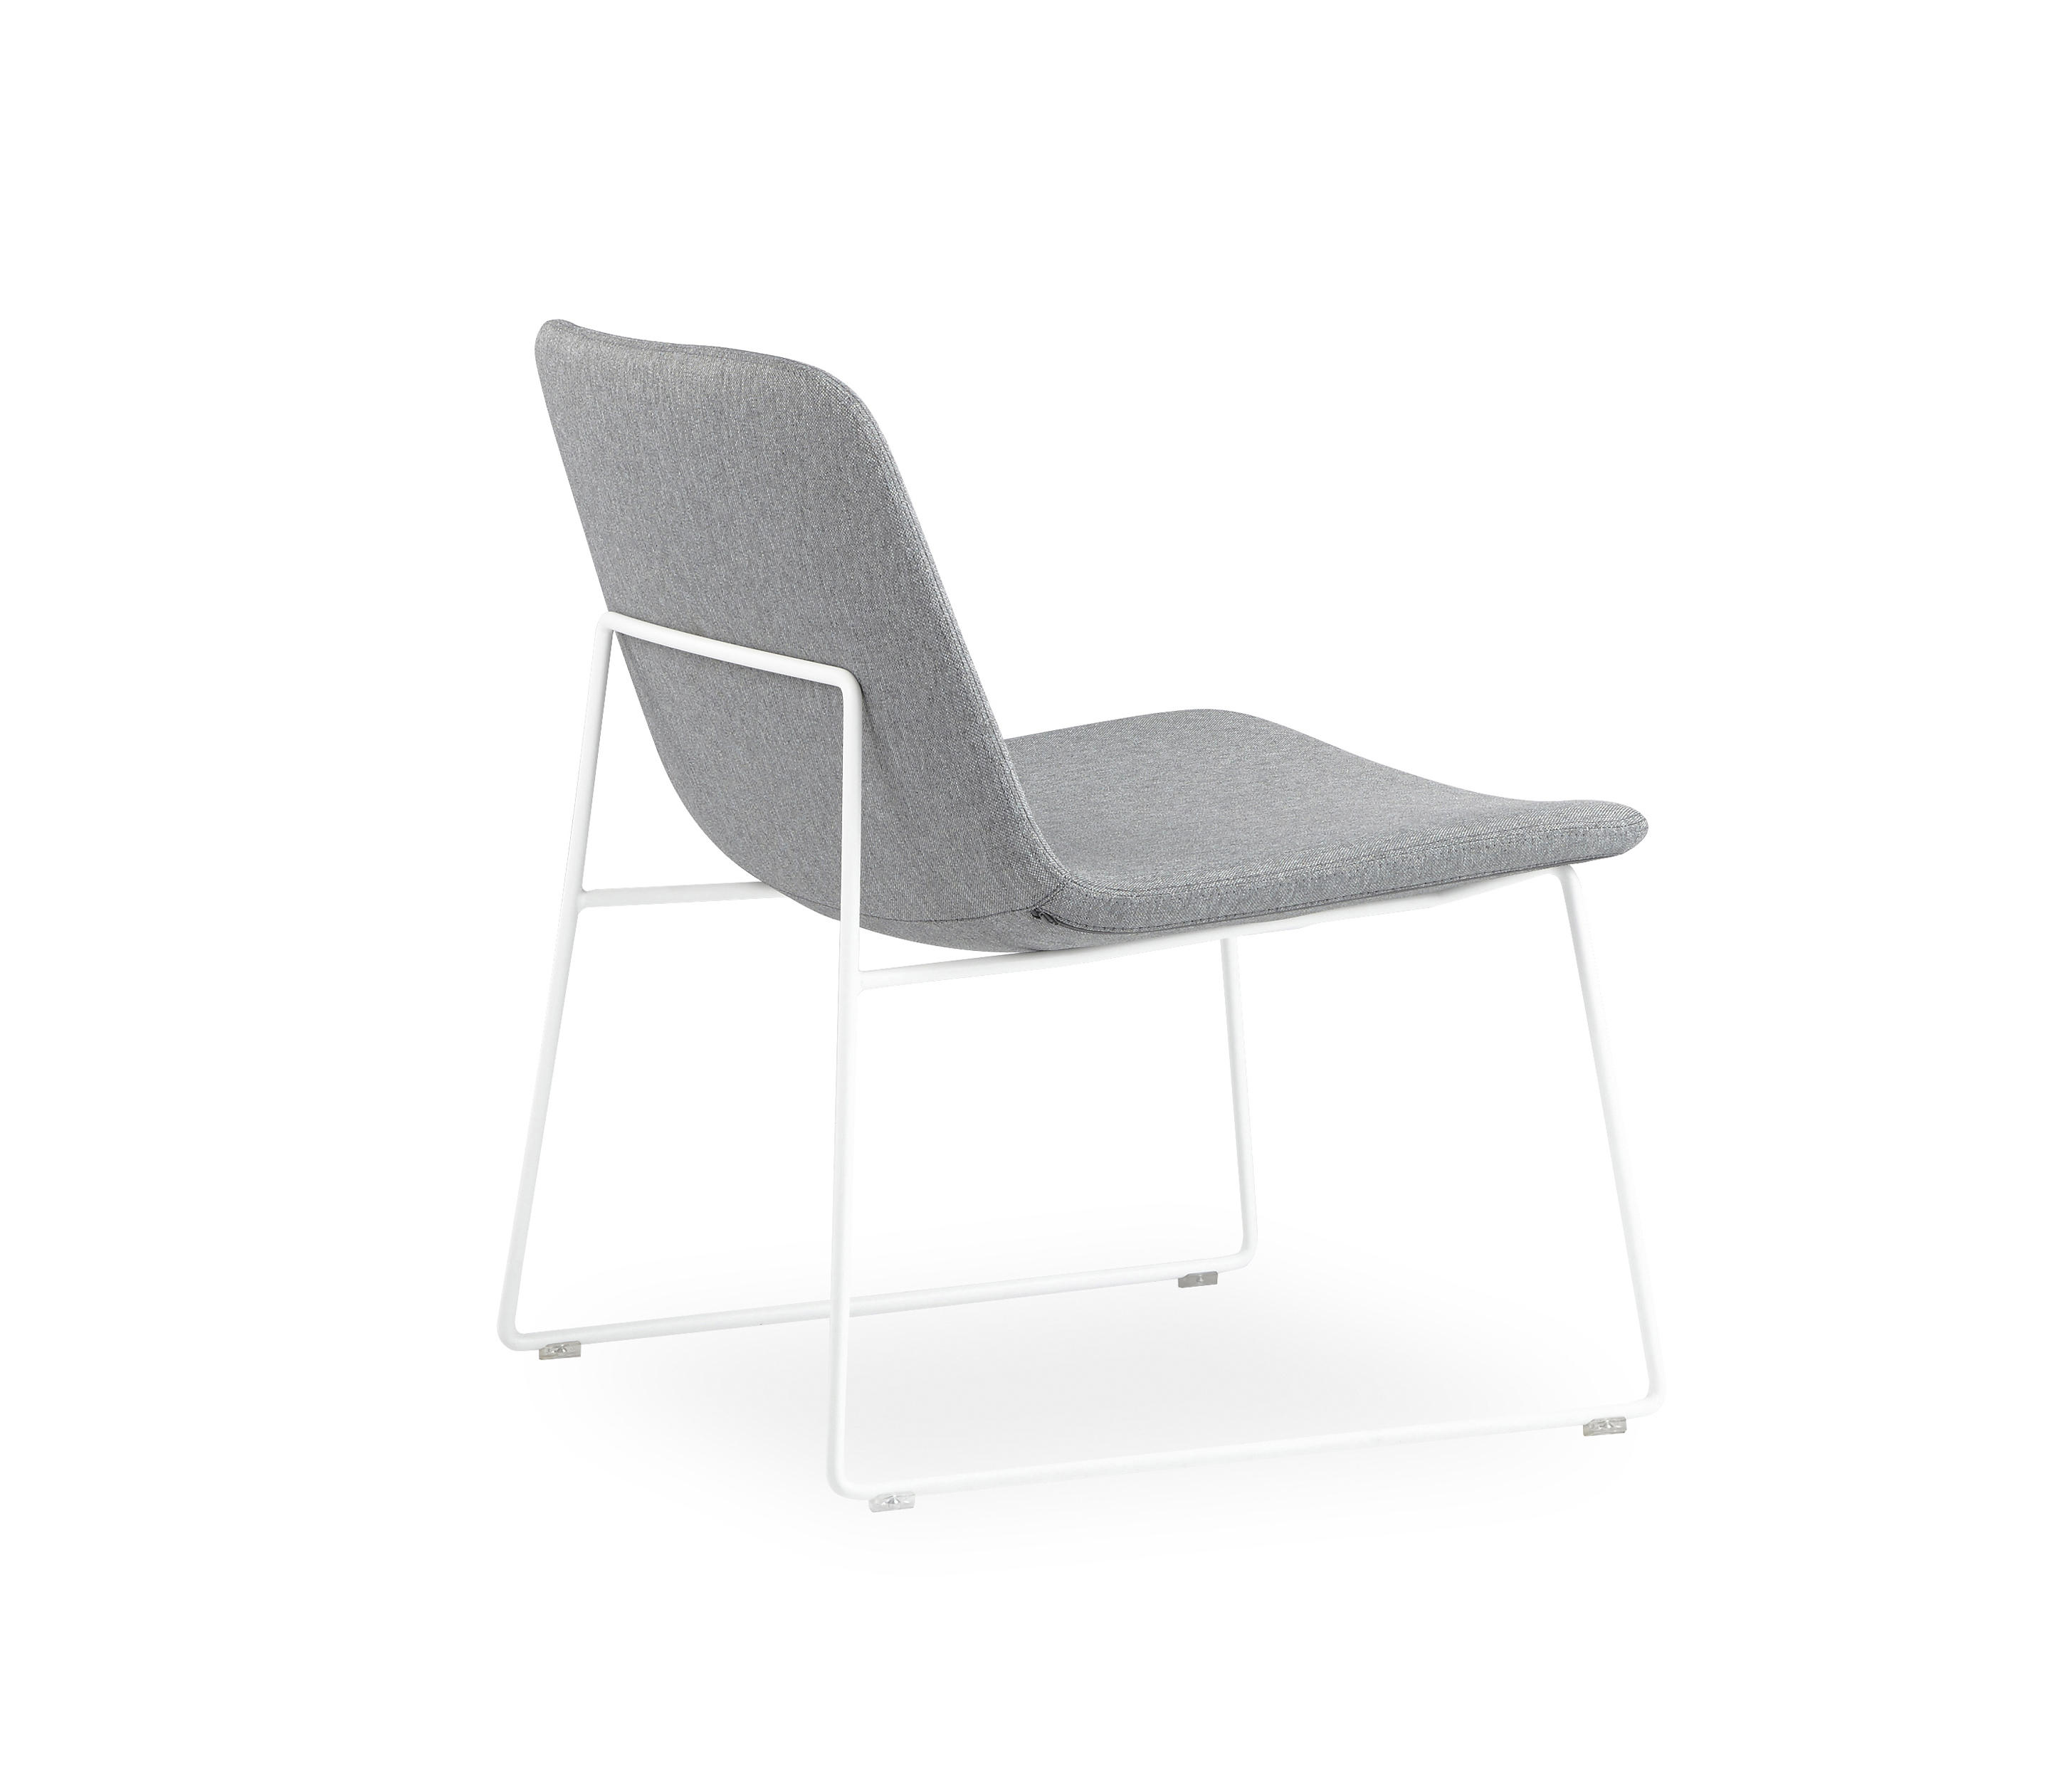 PERA Lounge Chair by B&T Design